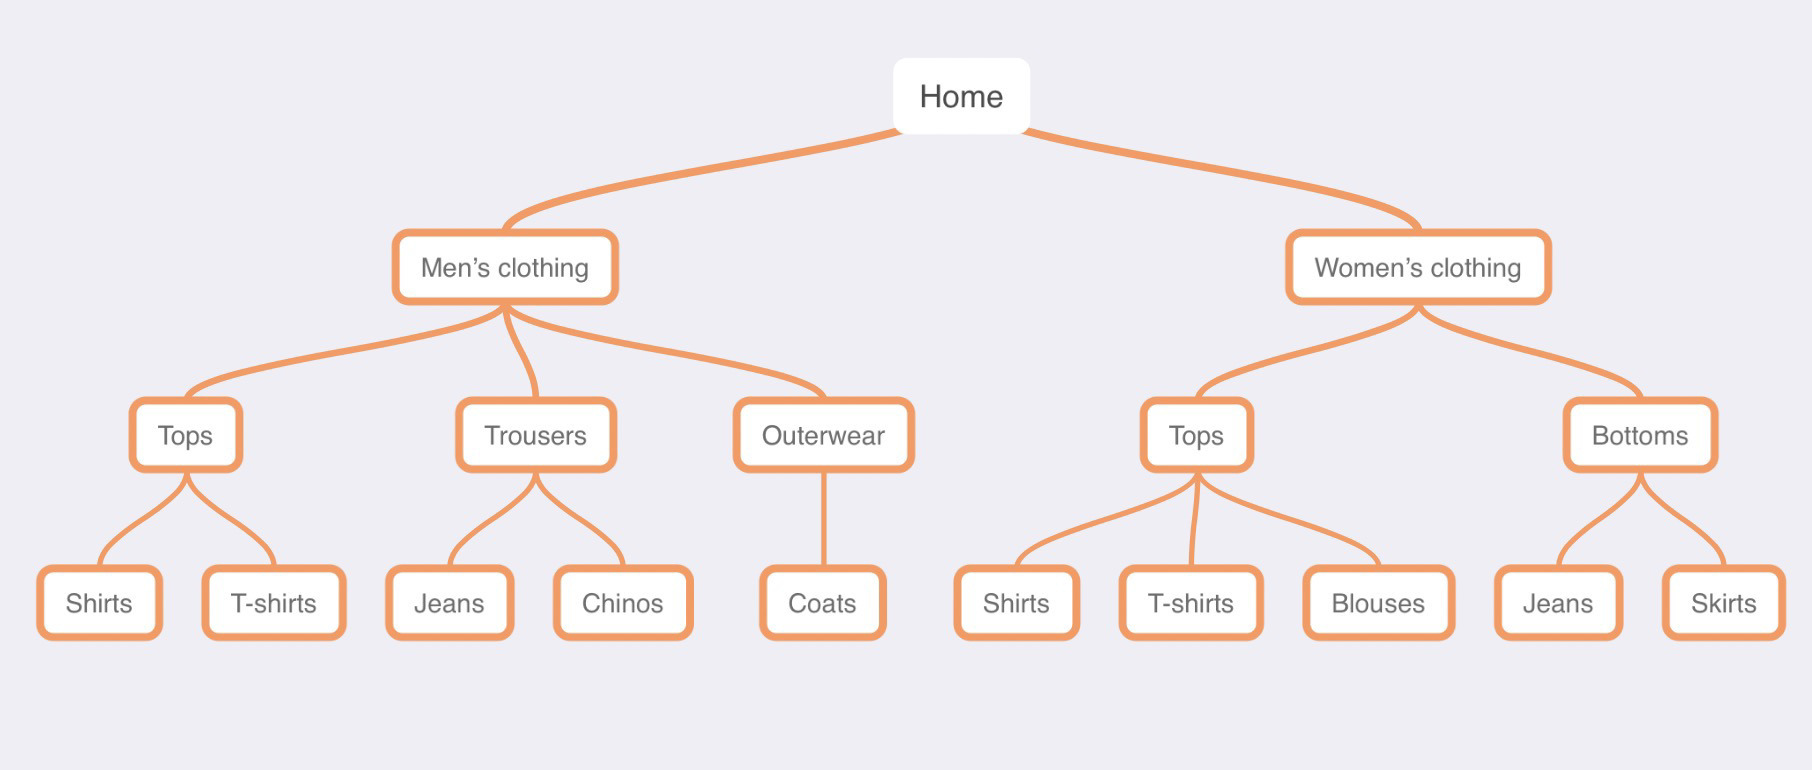 Example of what a basic website architecture looks like, via Ahrefs' blog